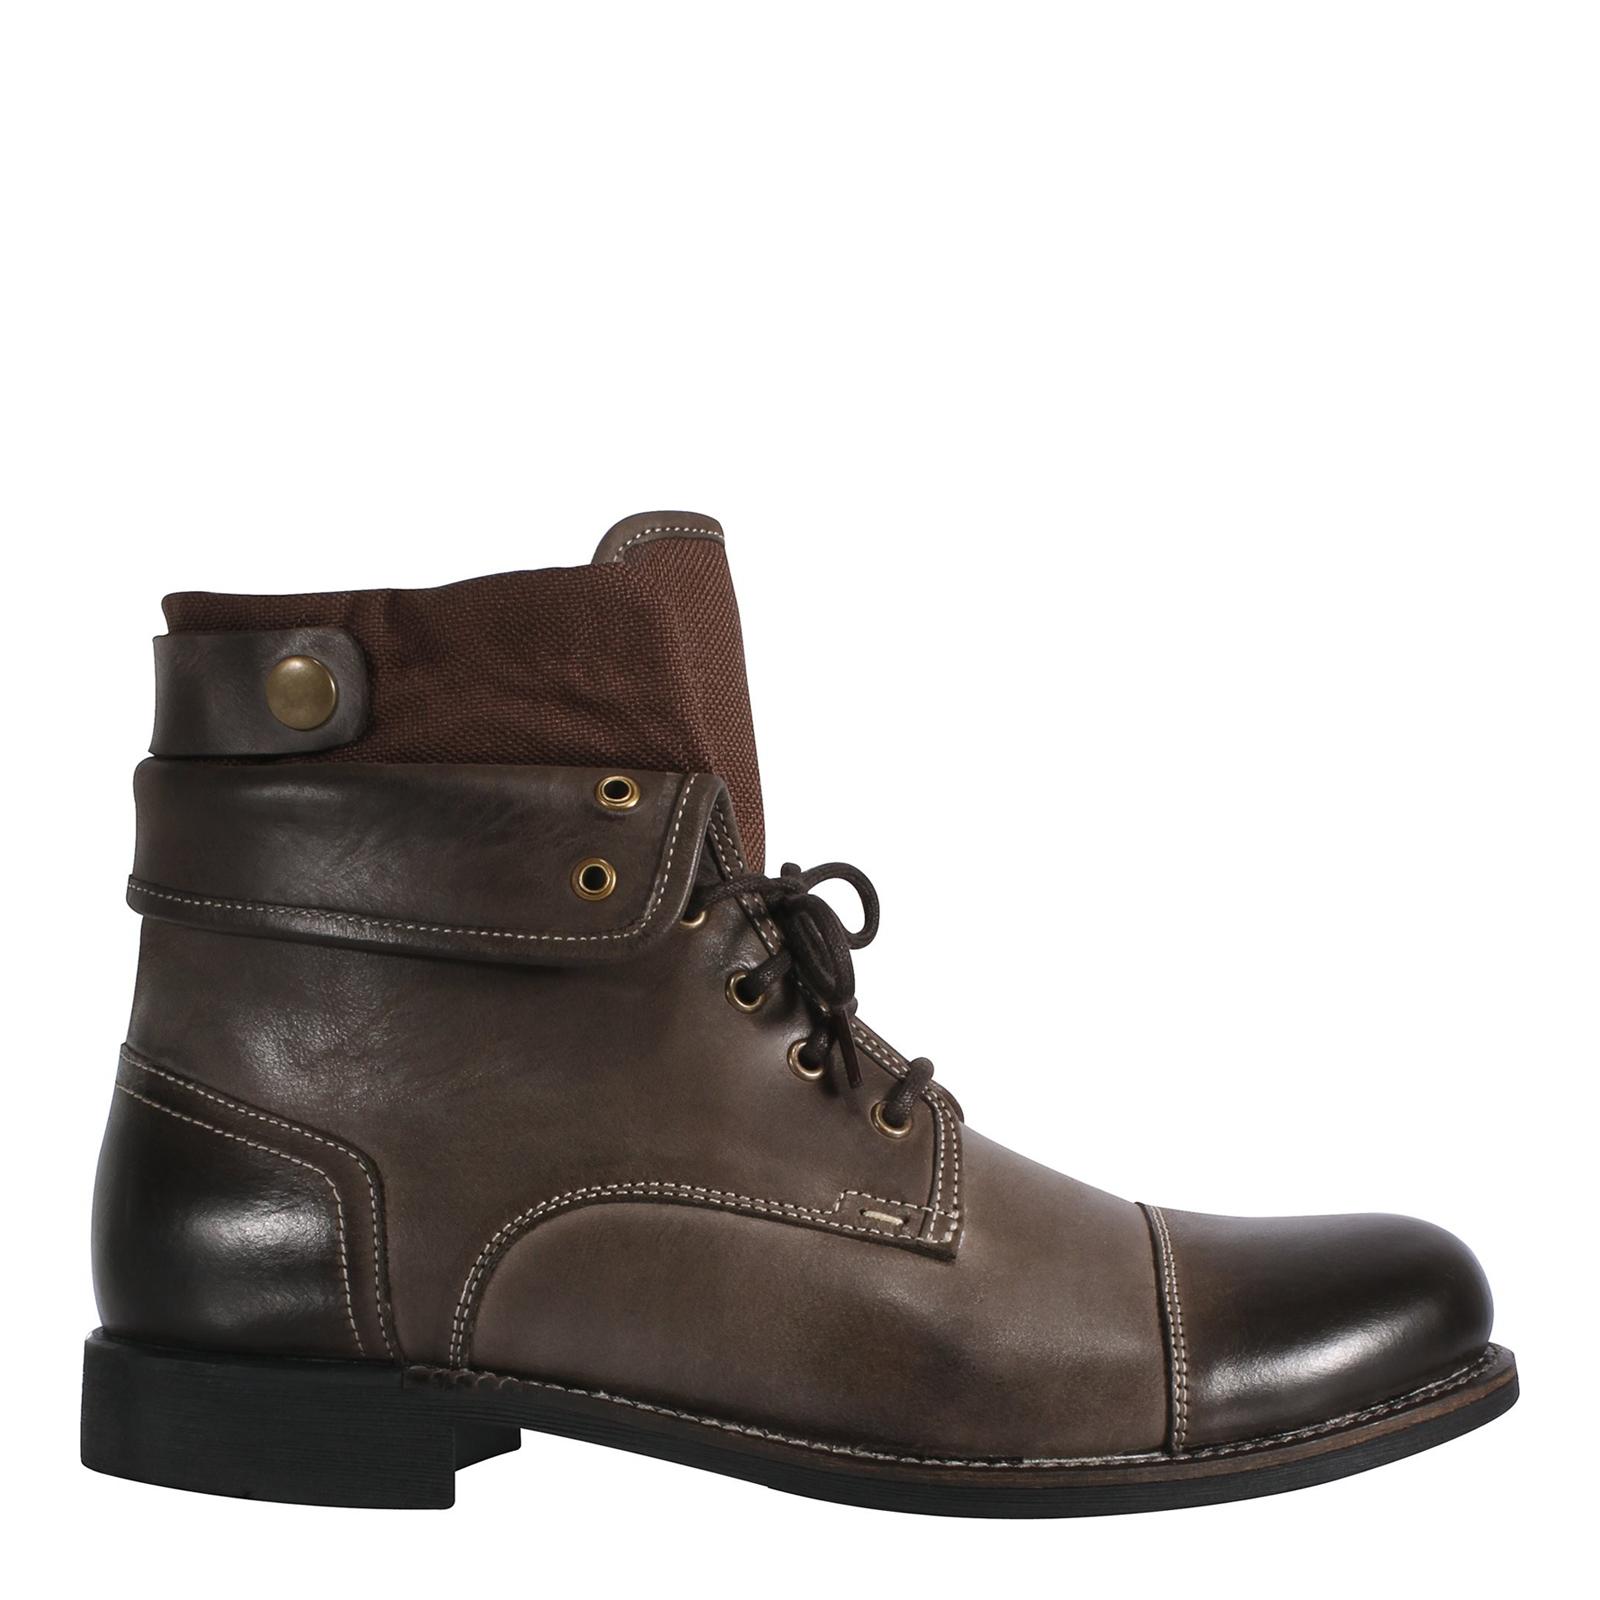 Dark Brown Leather Lace-Up Work Boots - BrandAlley